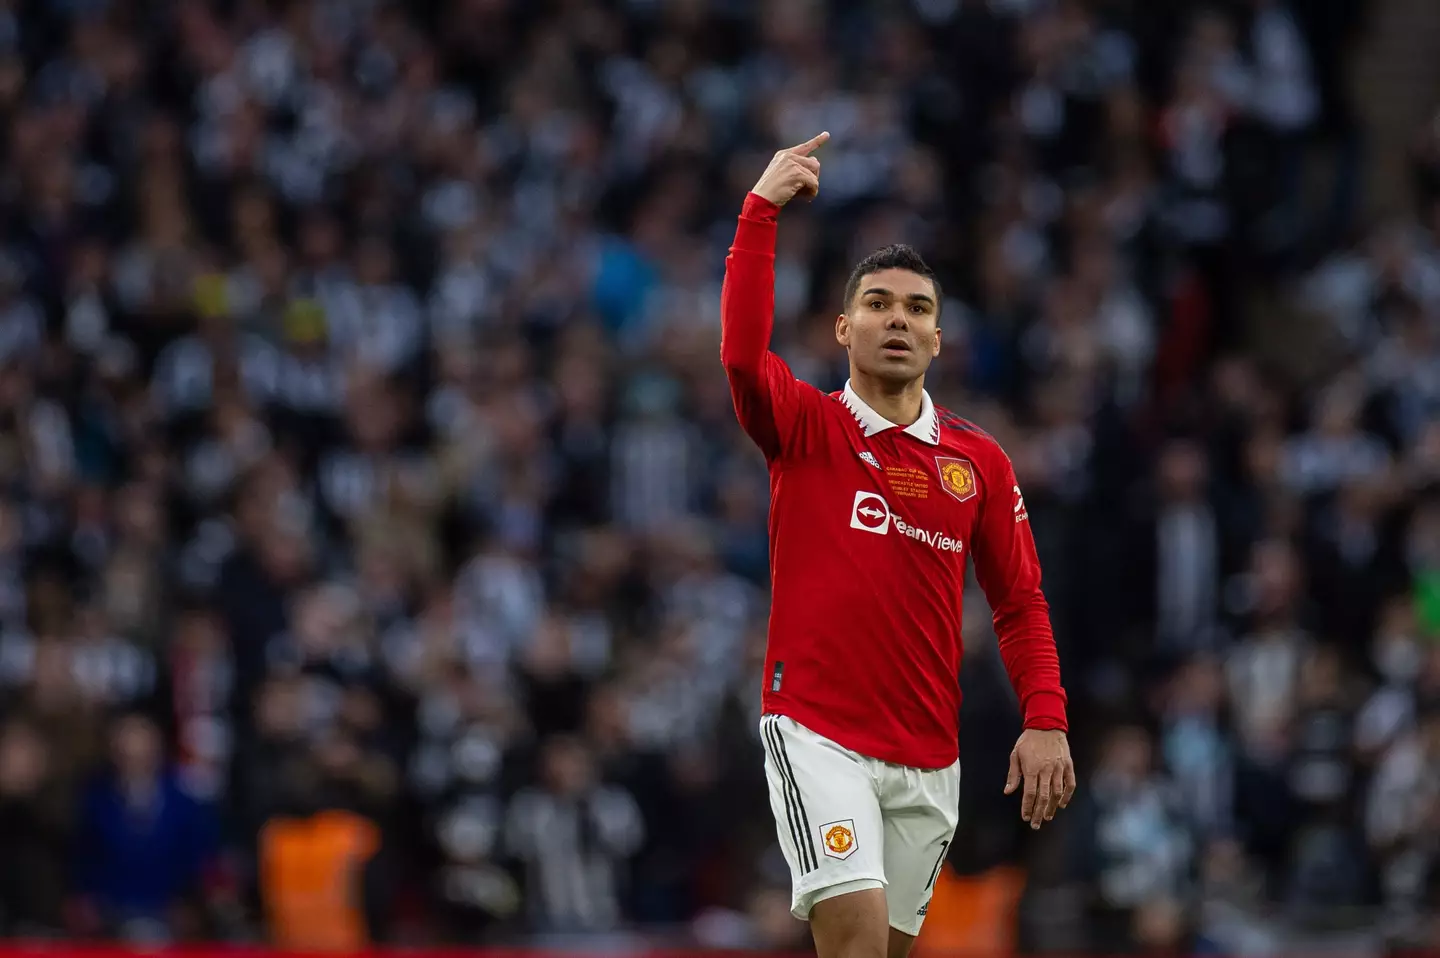 Casemiro has taken on a leadership role since joining Manchester United.